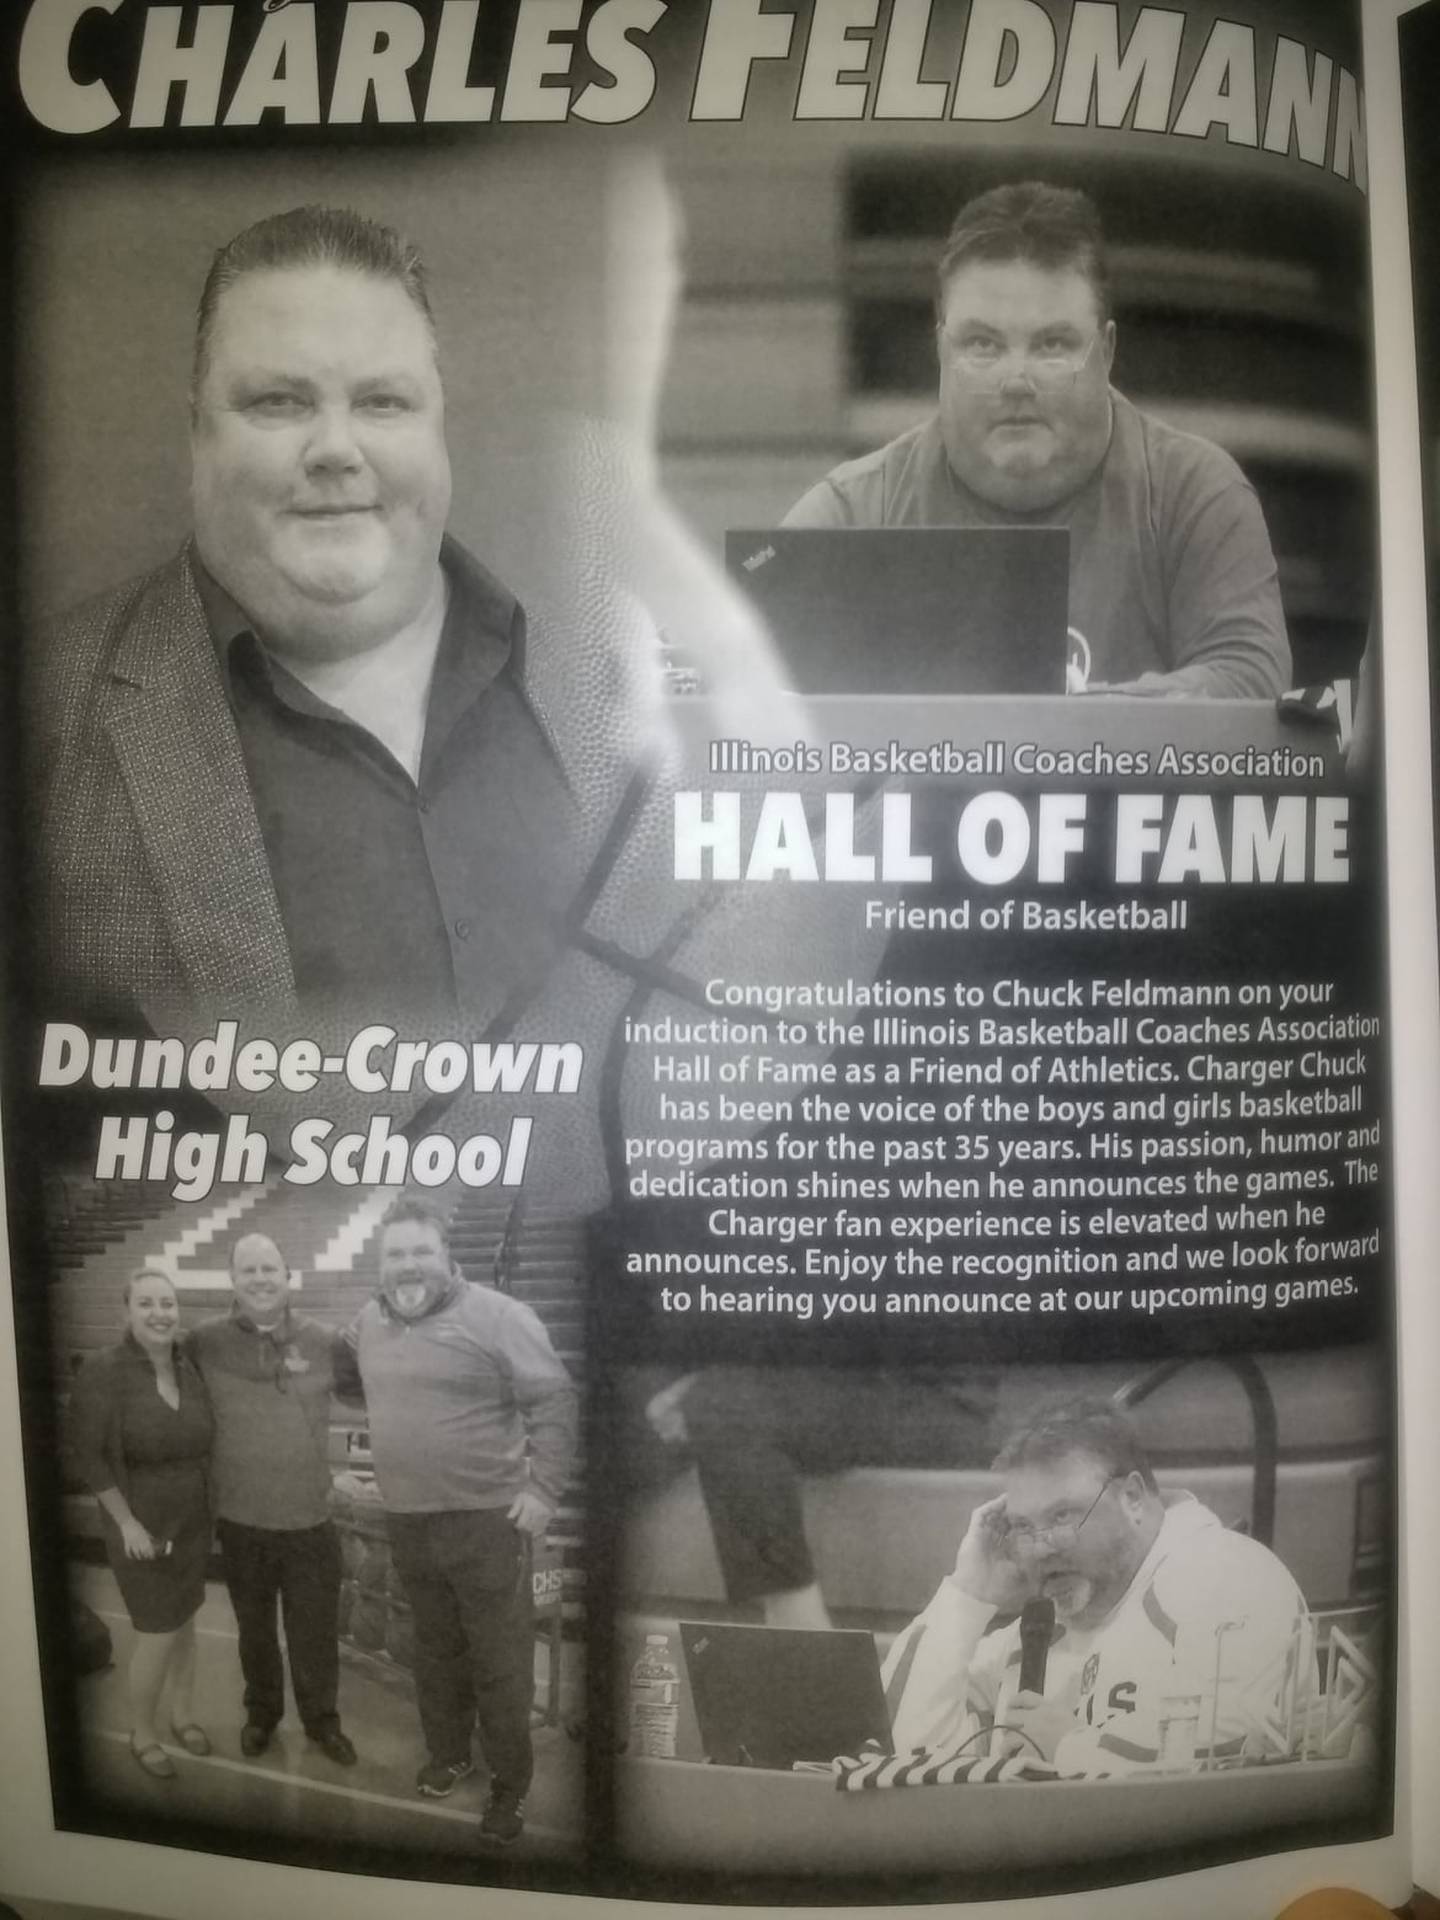 A page from the Illinois Basketball Coaches Association Hall of Fame program in 2020 when Chuck Feldmann was inducted as a friend of basketball.